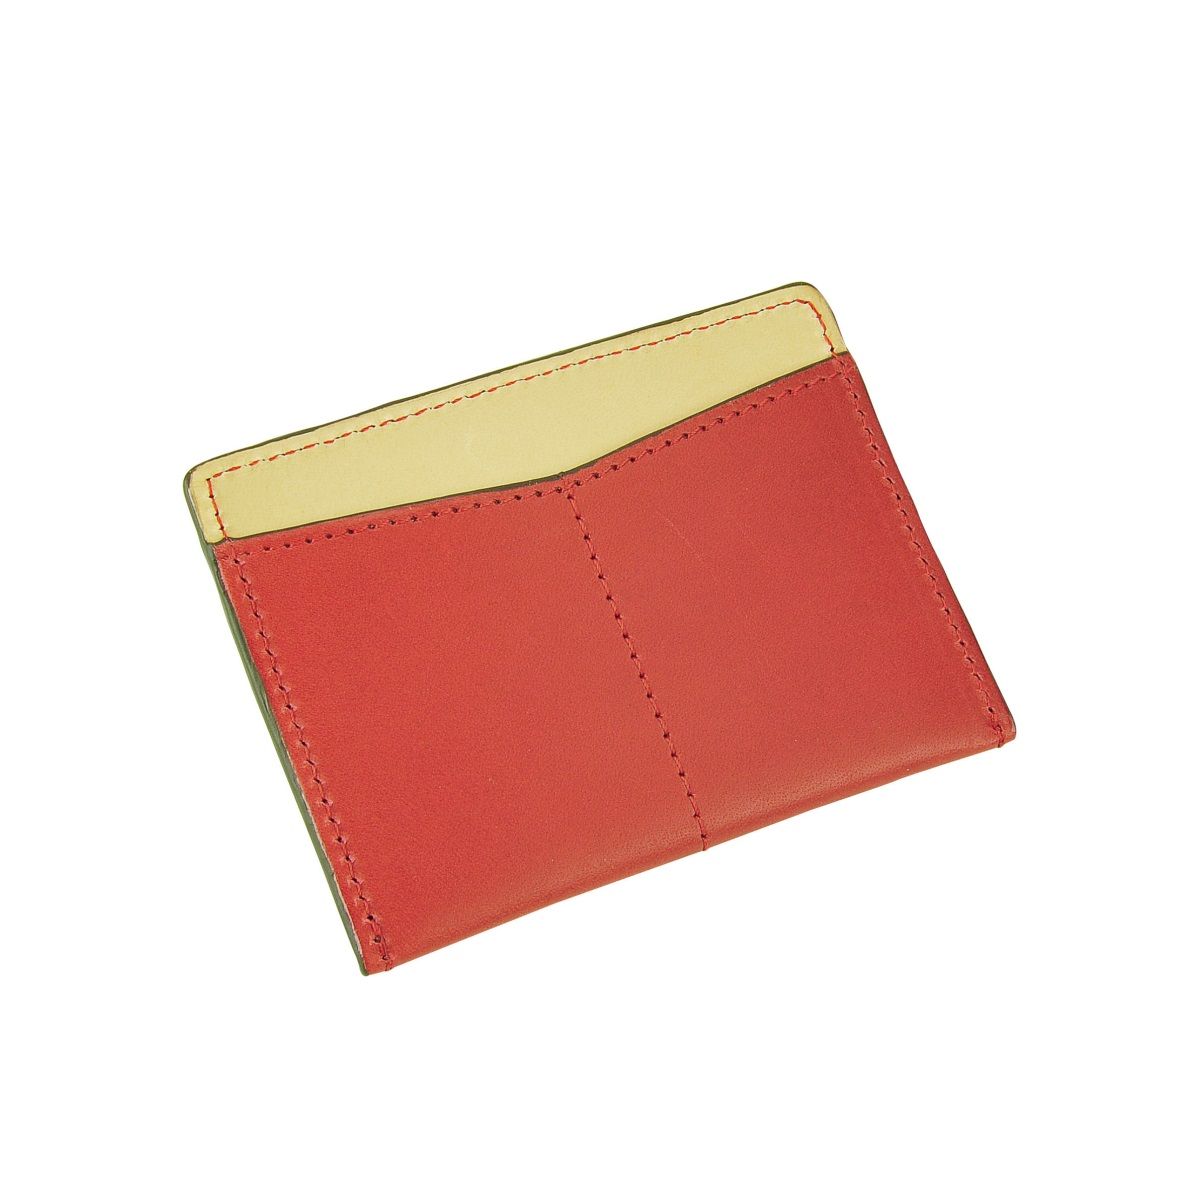 J.FOLD Flat Carrier Leather Wallet - Red